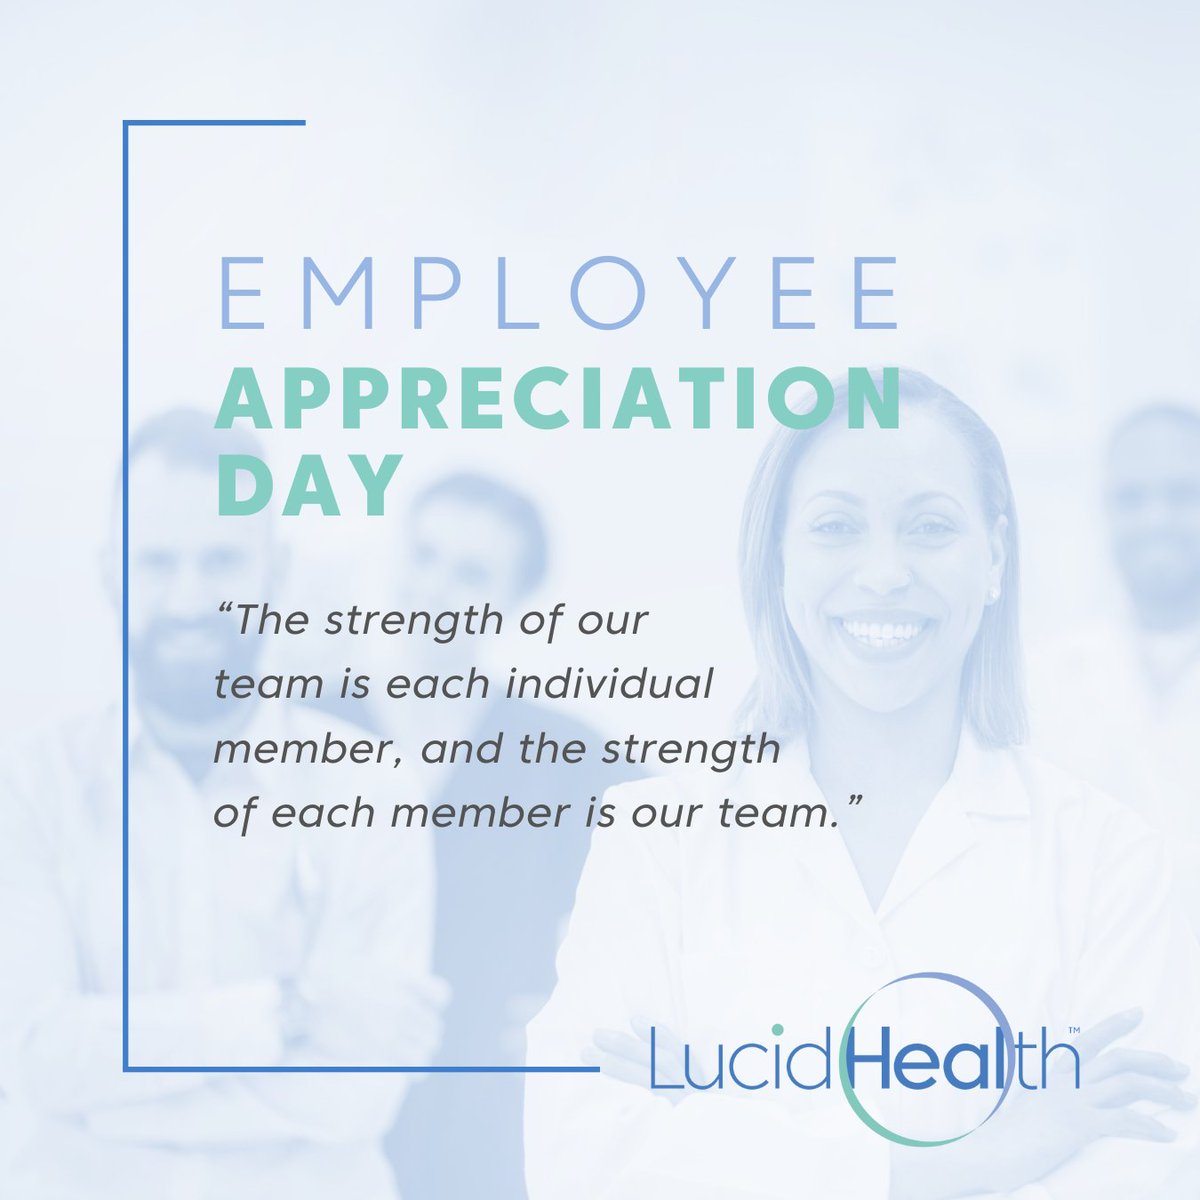 It's Employee Appreciation Day! Thank you to our team of physicians and staff here at LucidHealth for your unwavering commitment and dedication to exceptional patient care, not just today but every day! #PoweredByLucidHealth #ClearlyTheFuture #LucidHealth #Radiology #RadLeaders